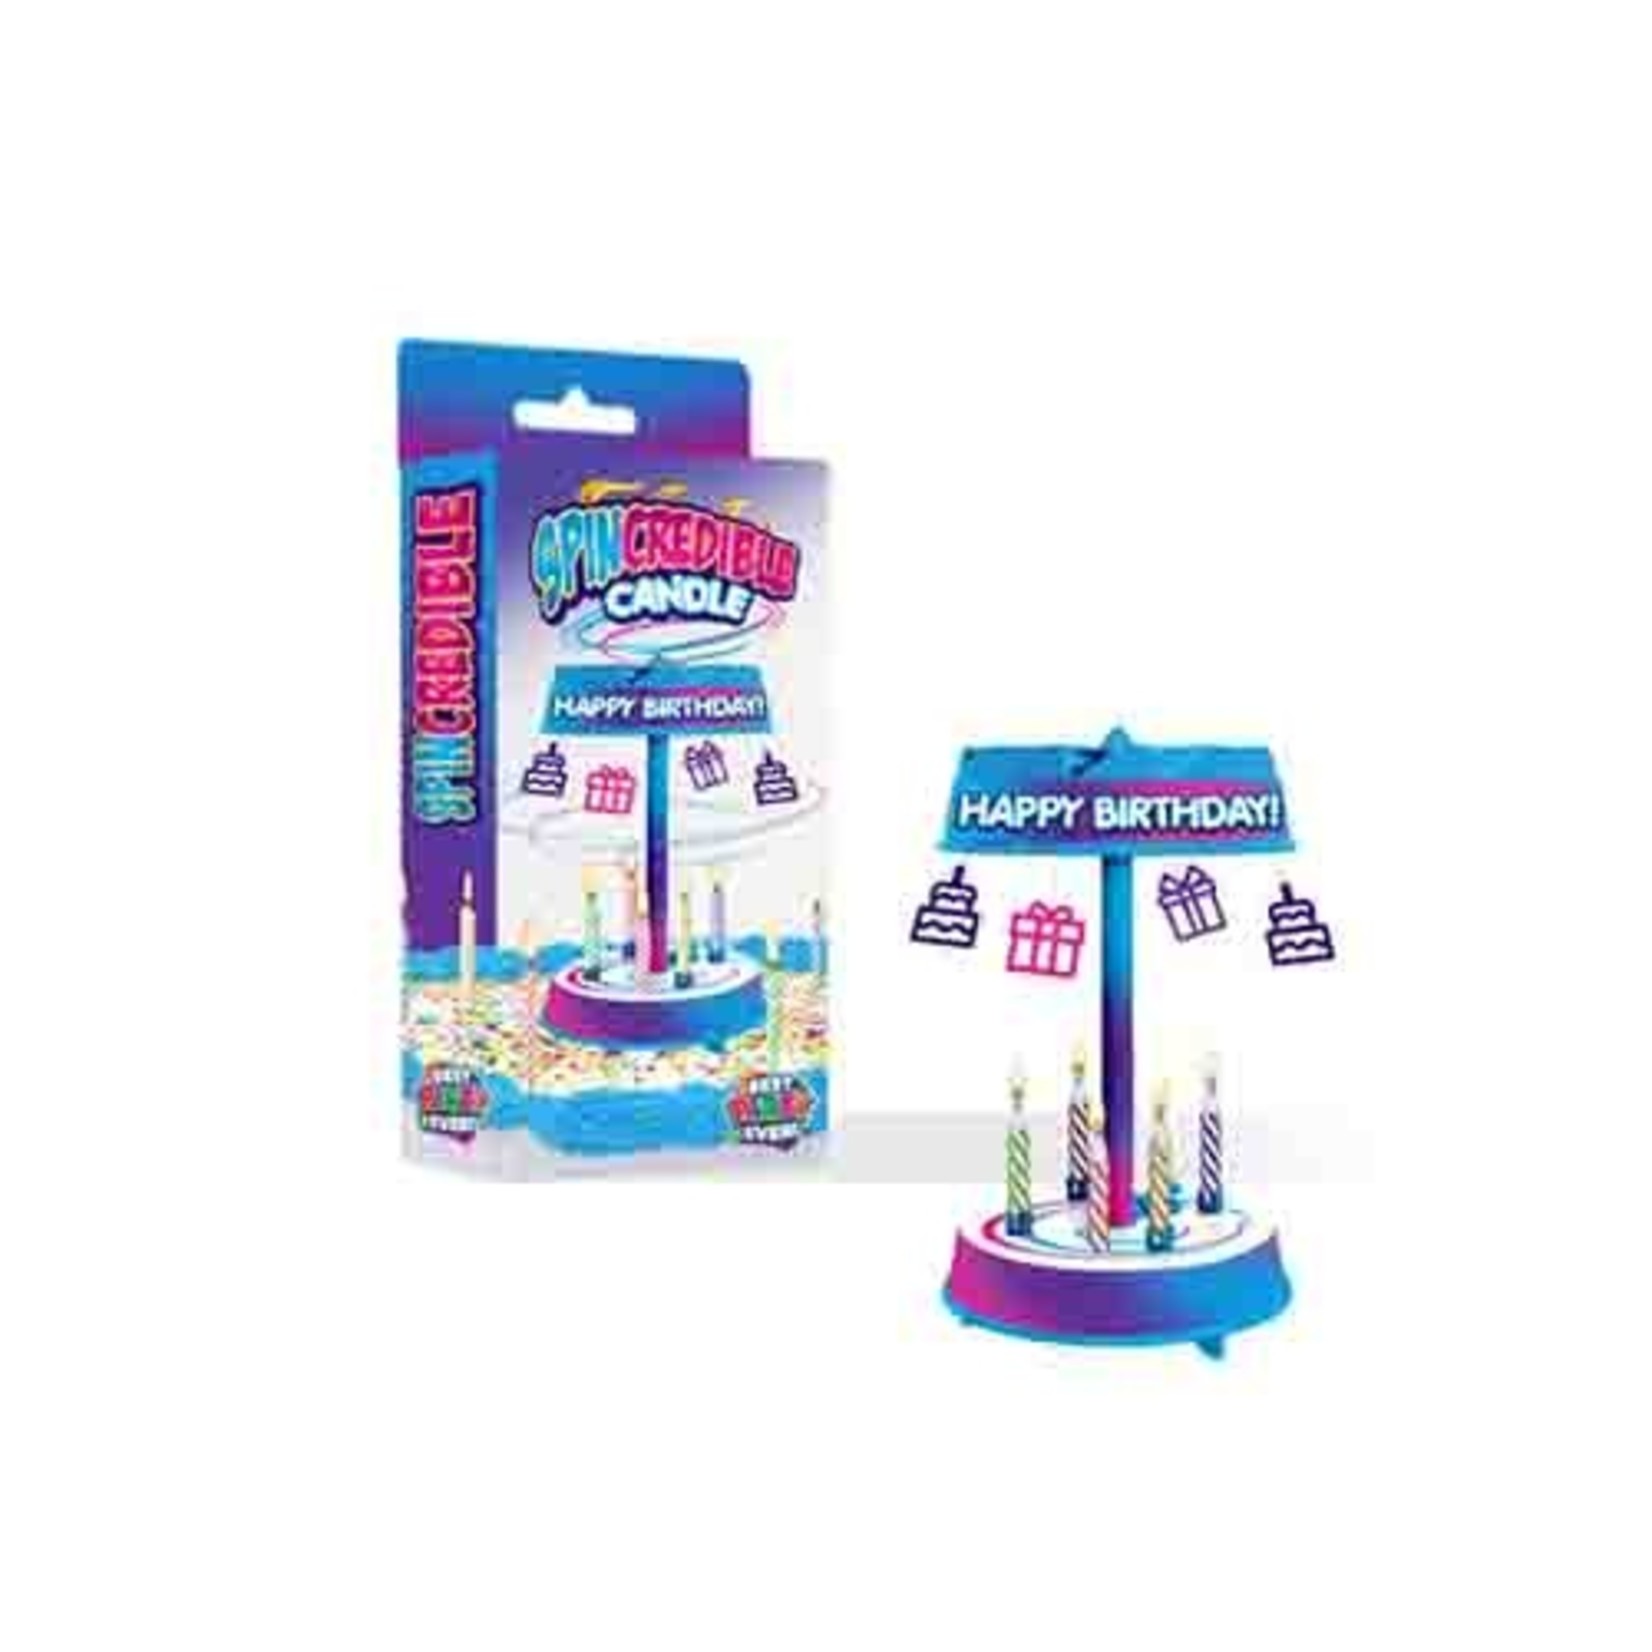 Just For Laughs Spin-Credible Birthday Candle - 1ct.